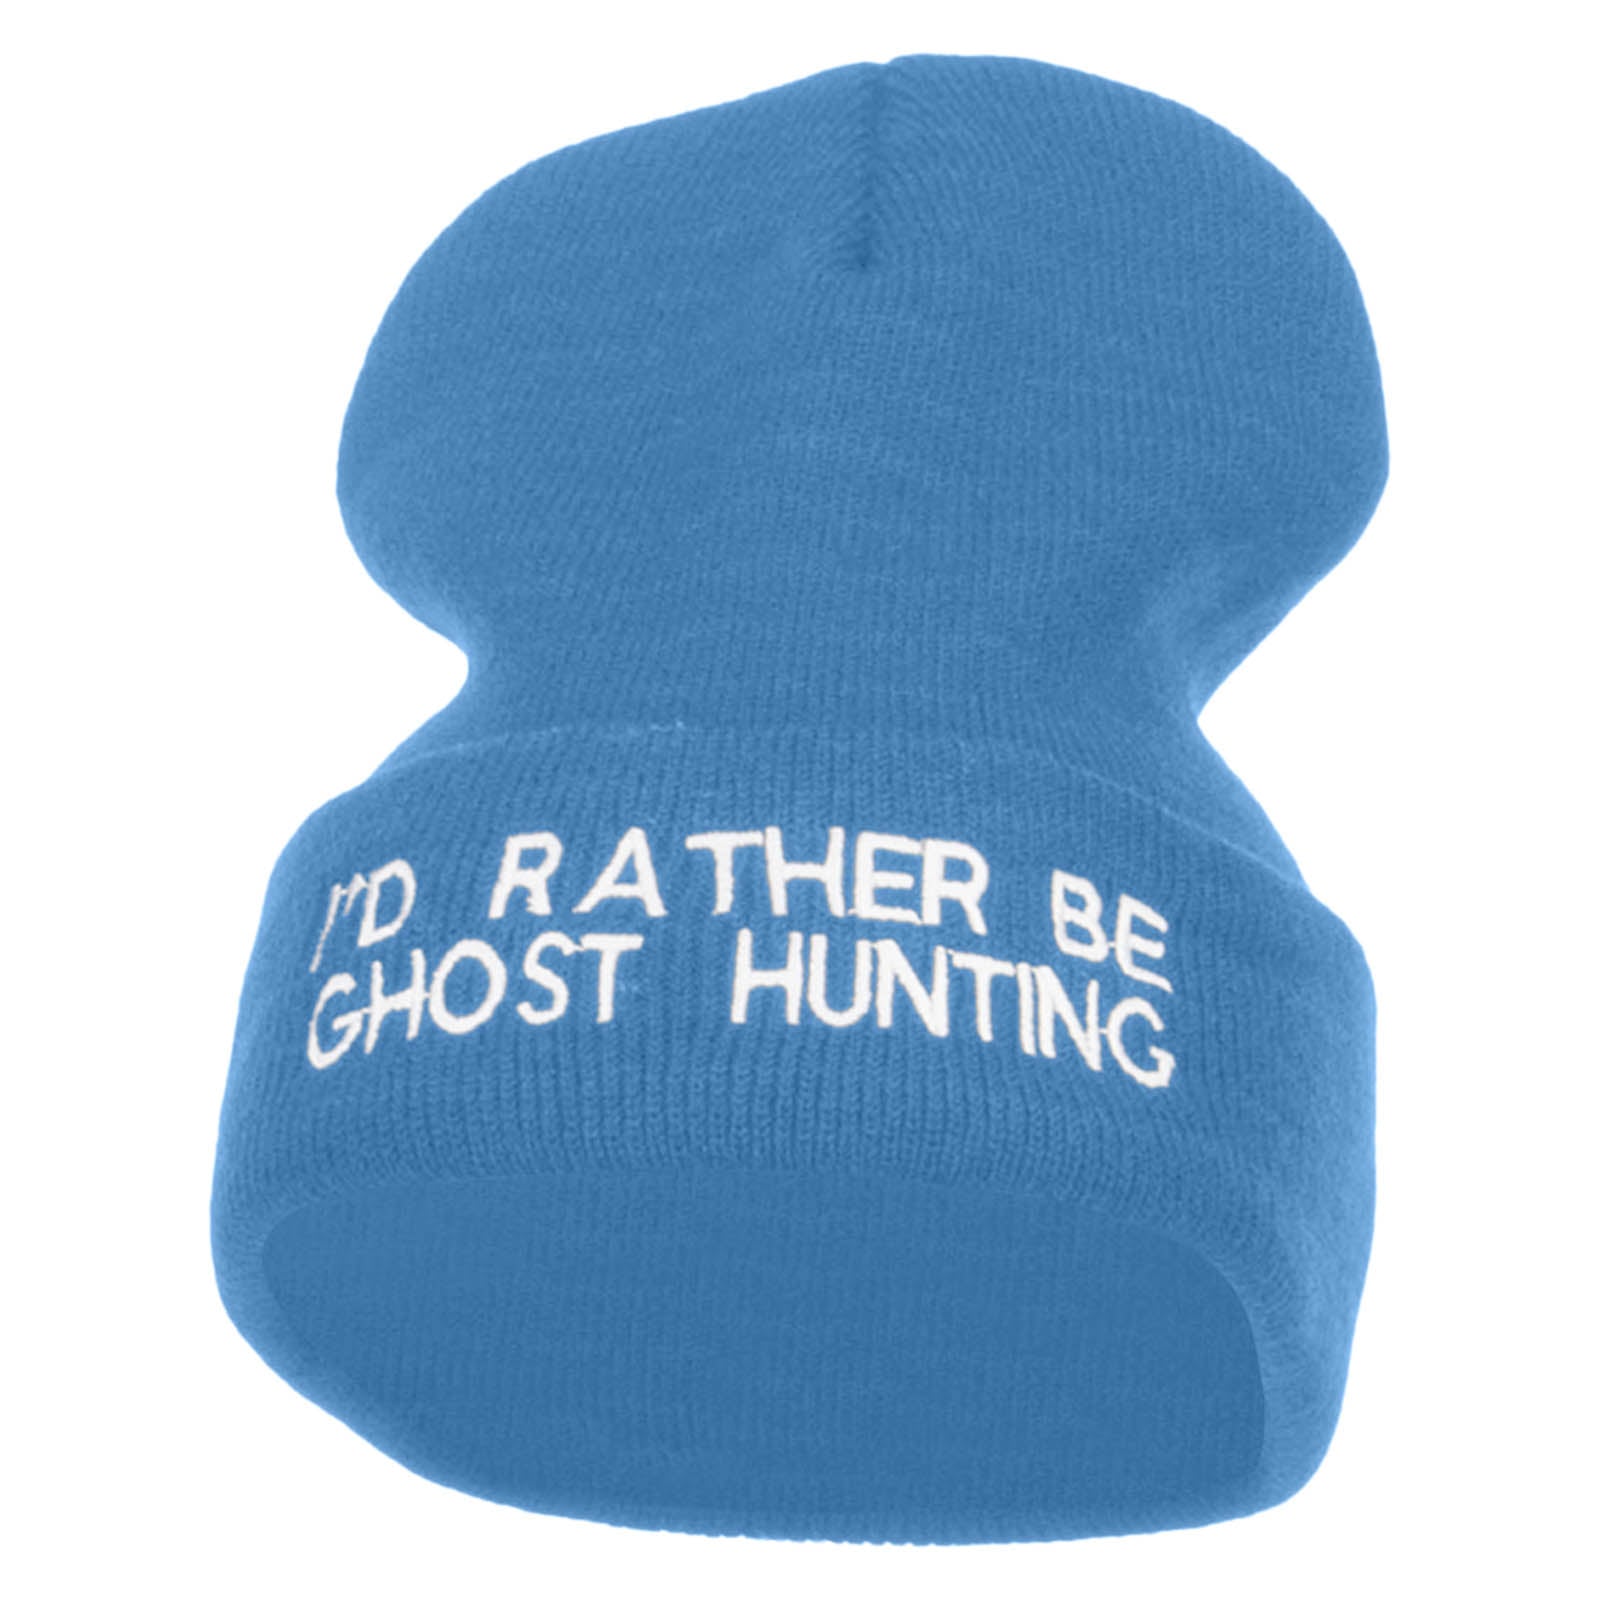 I&#039;d Rather Be Ghost Hunting Long Beanie - Sky Blue OSFM